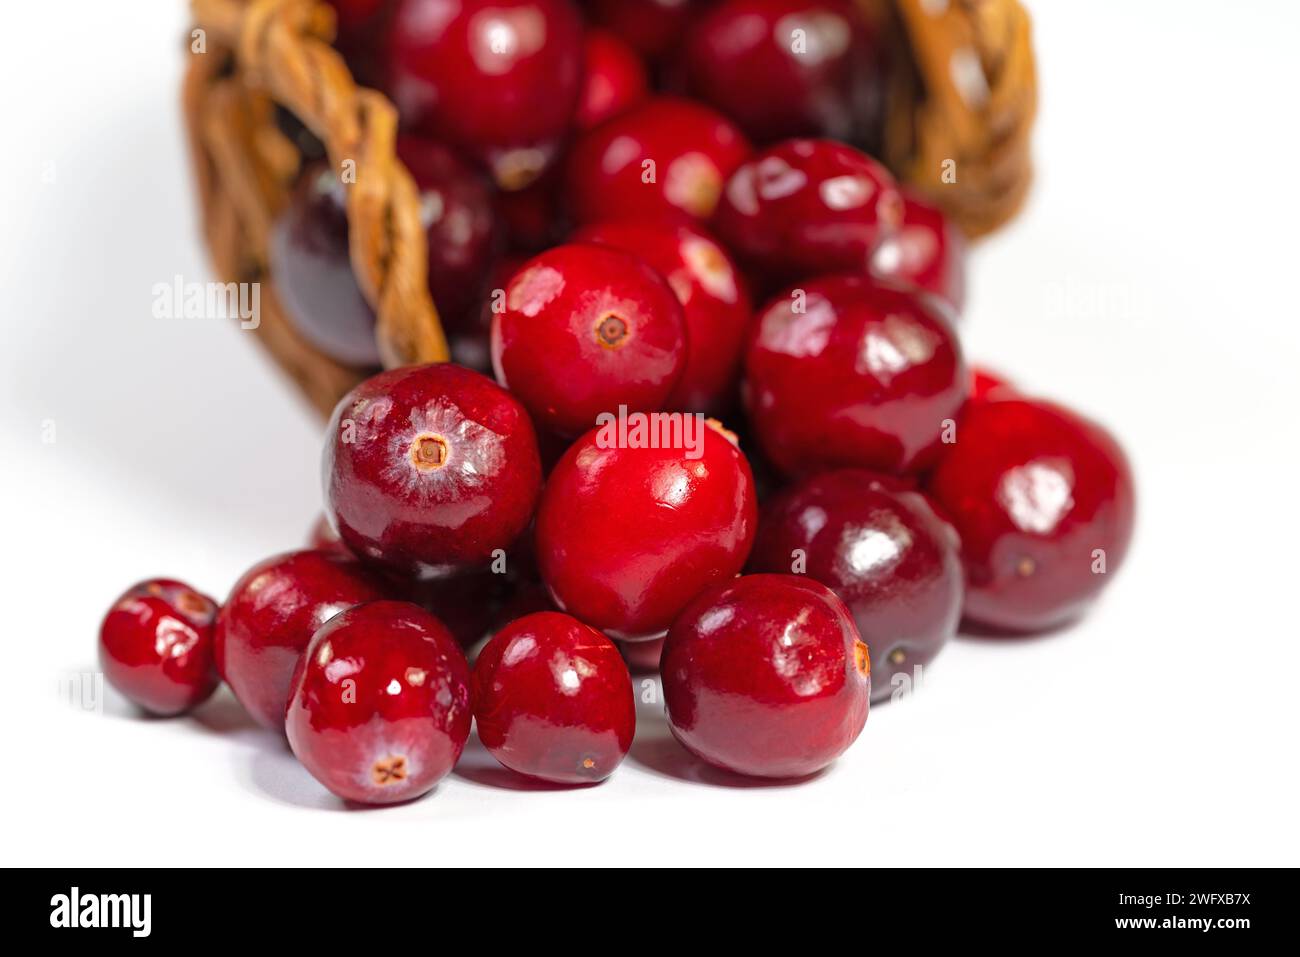 Cranberries in a basket, close-up Stock Photo